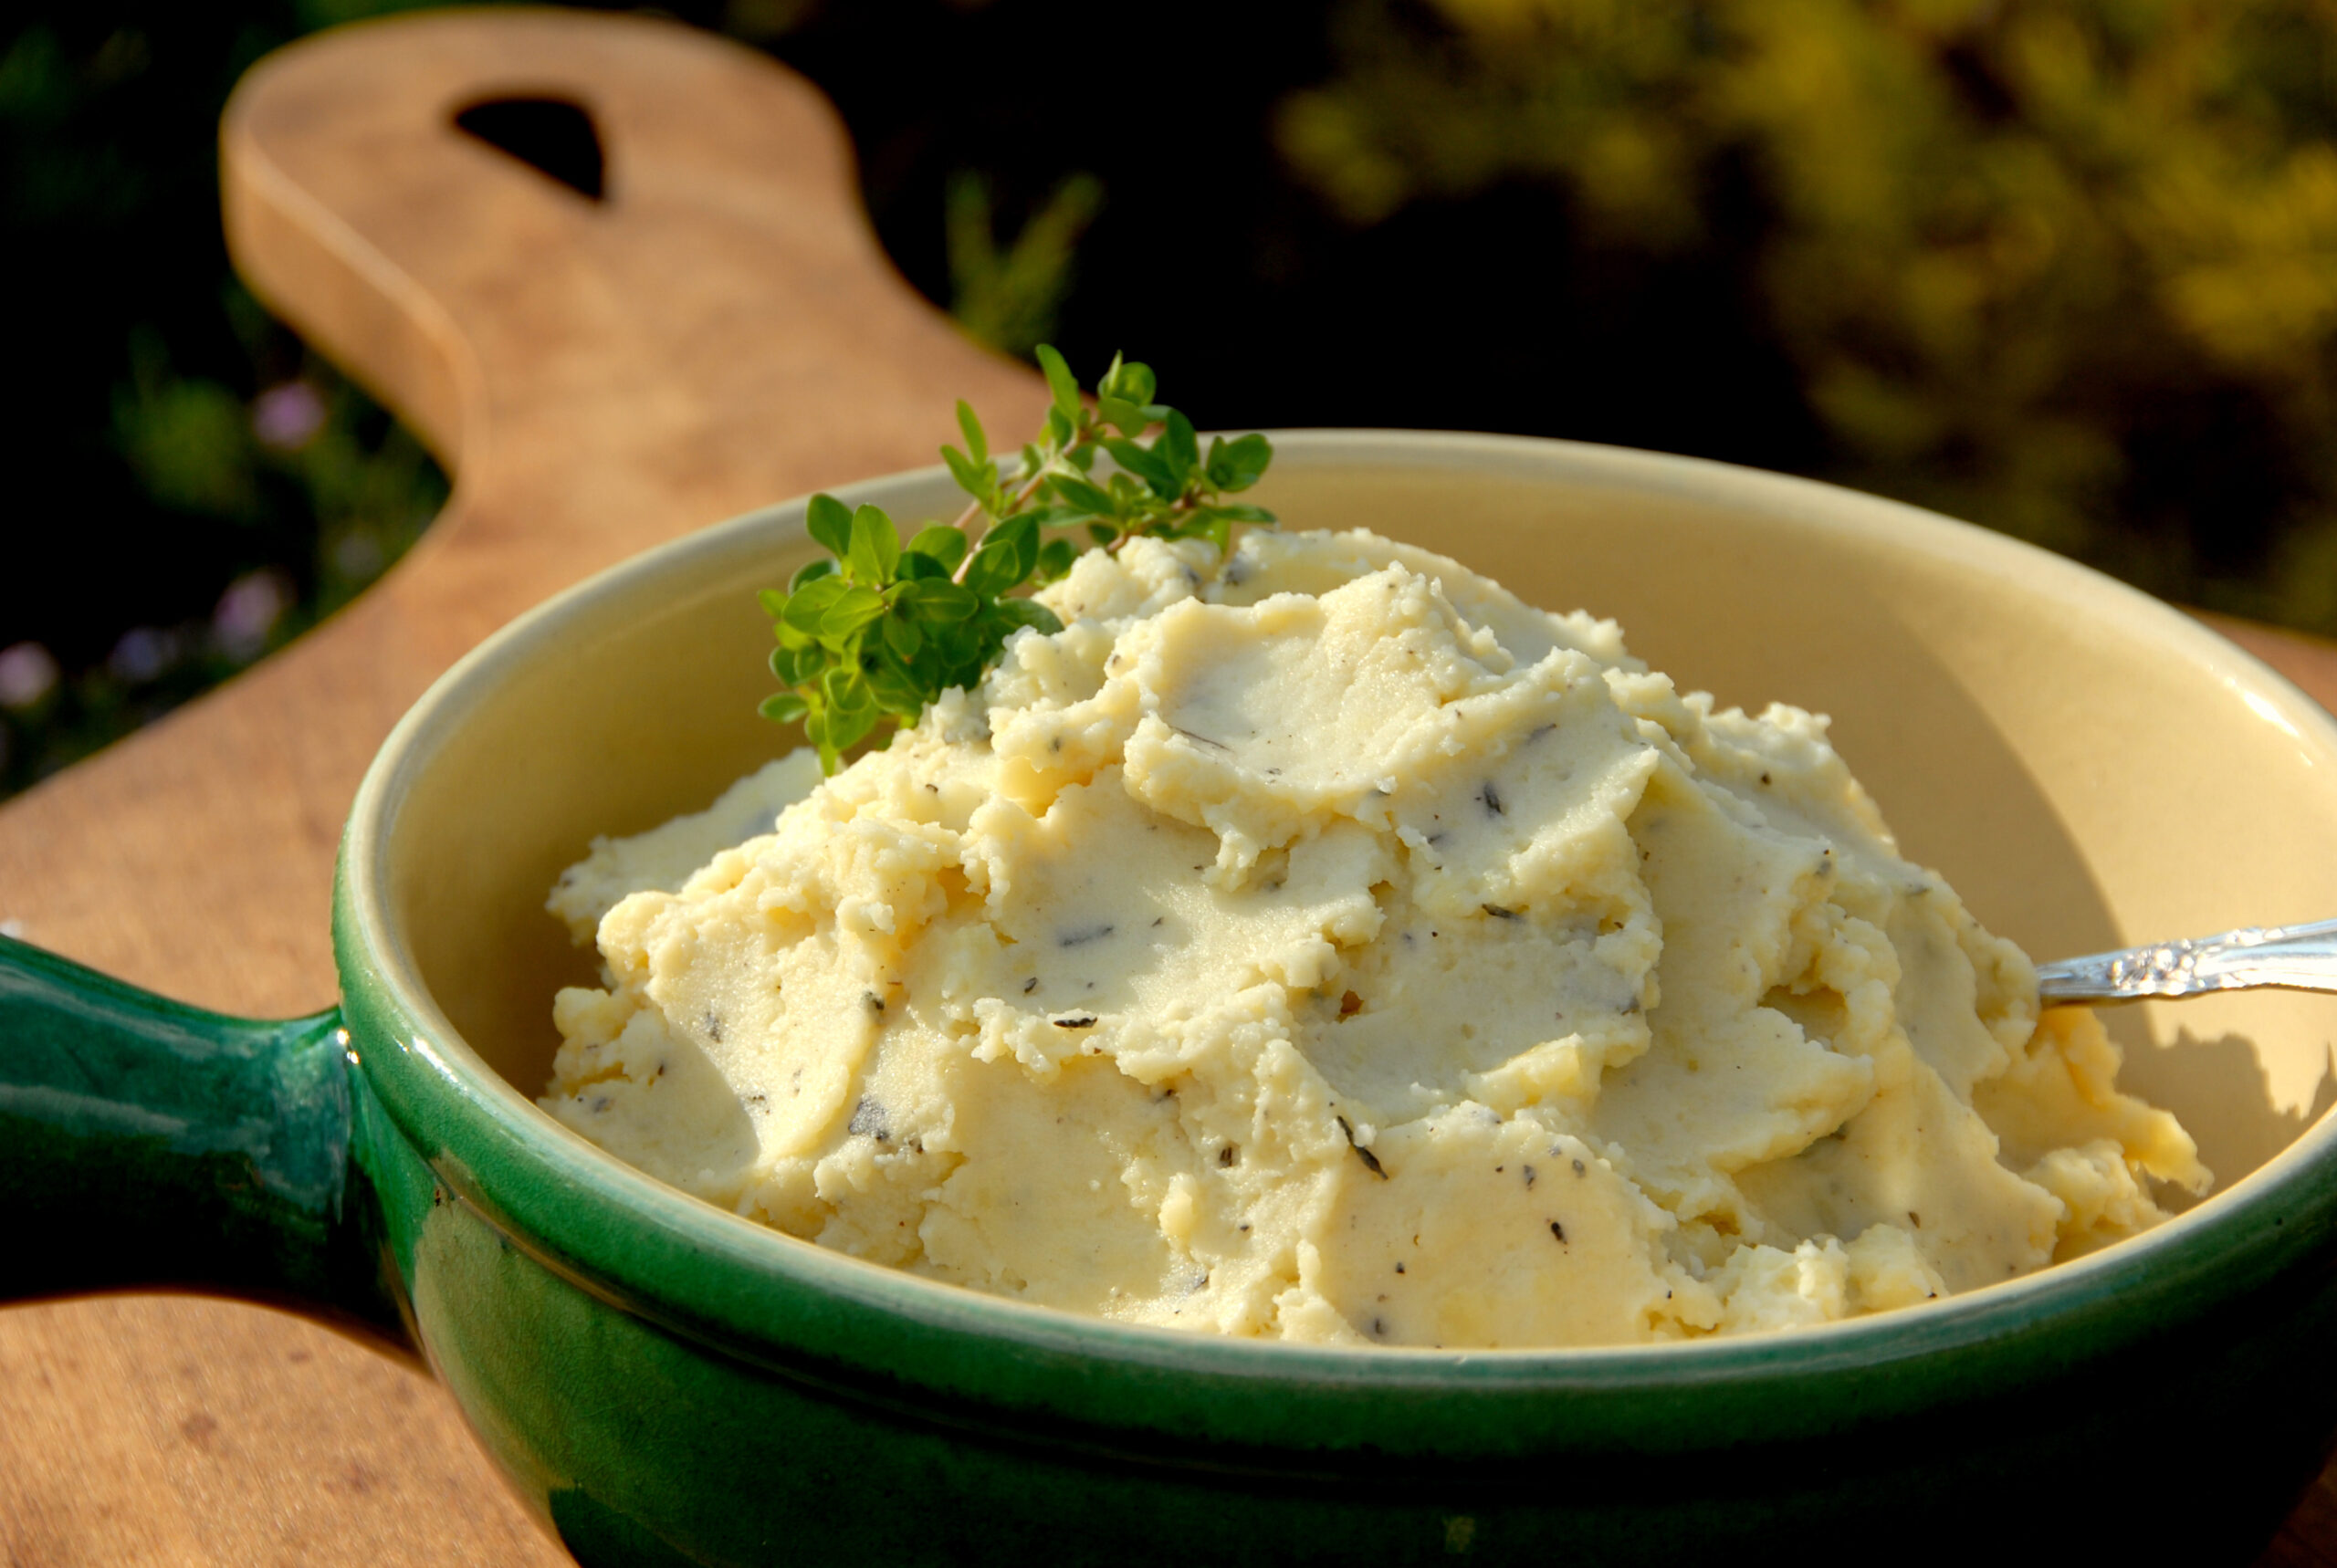 mashed potatoes with fresh herbs; rosemary, sage, and thyme.